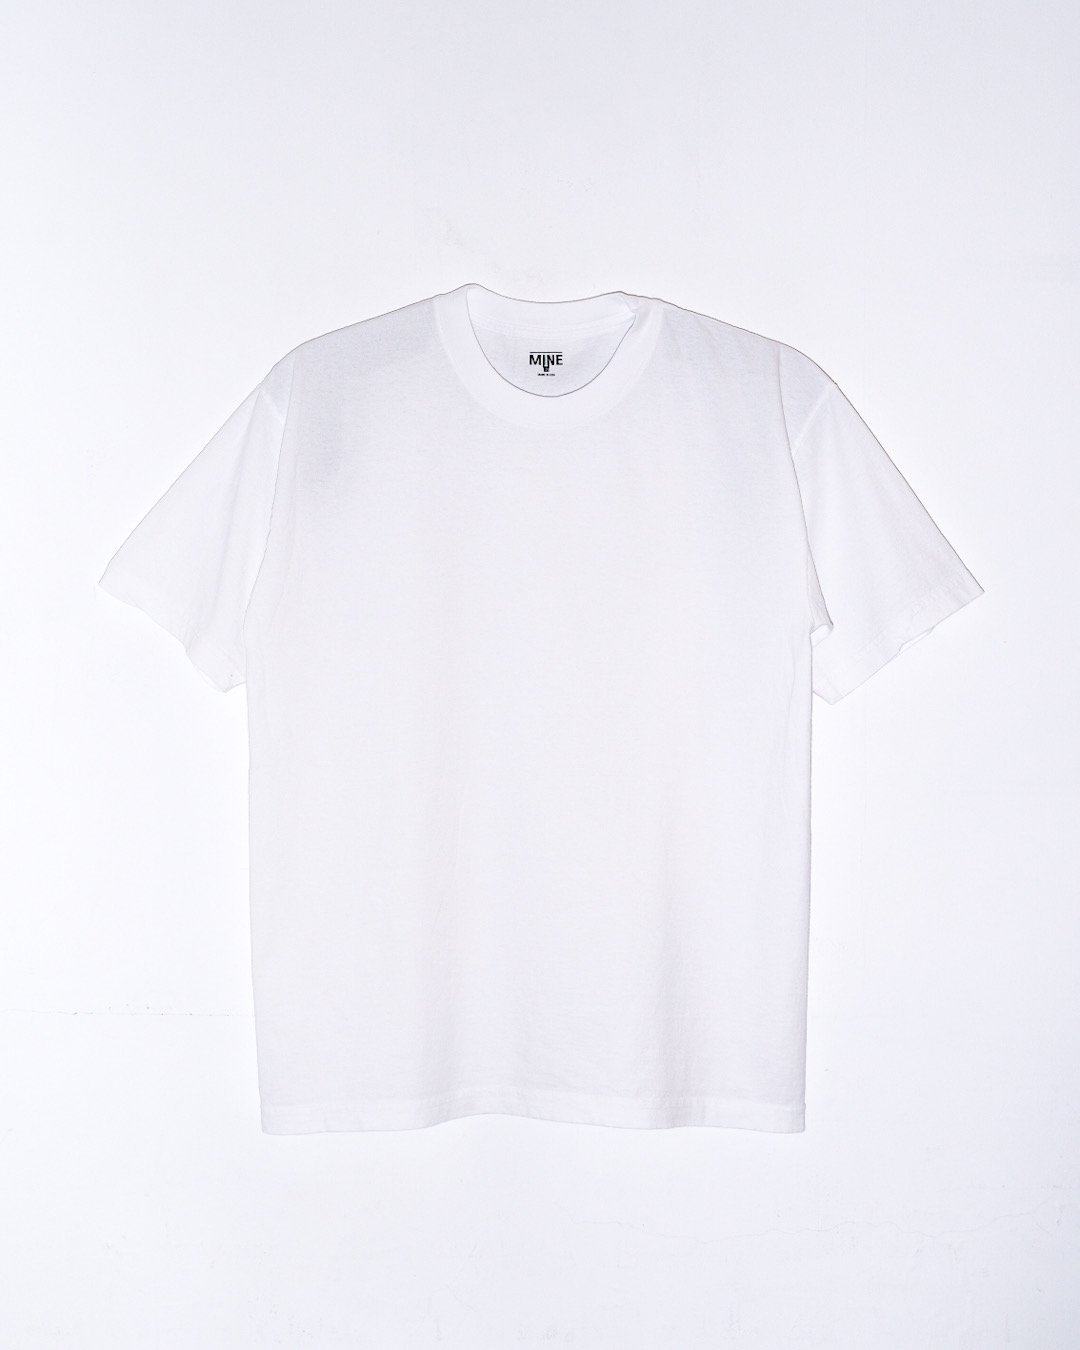 MINEDUCT TAPE T-SHIRT/WHITE LABEL